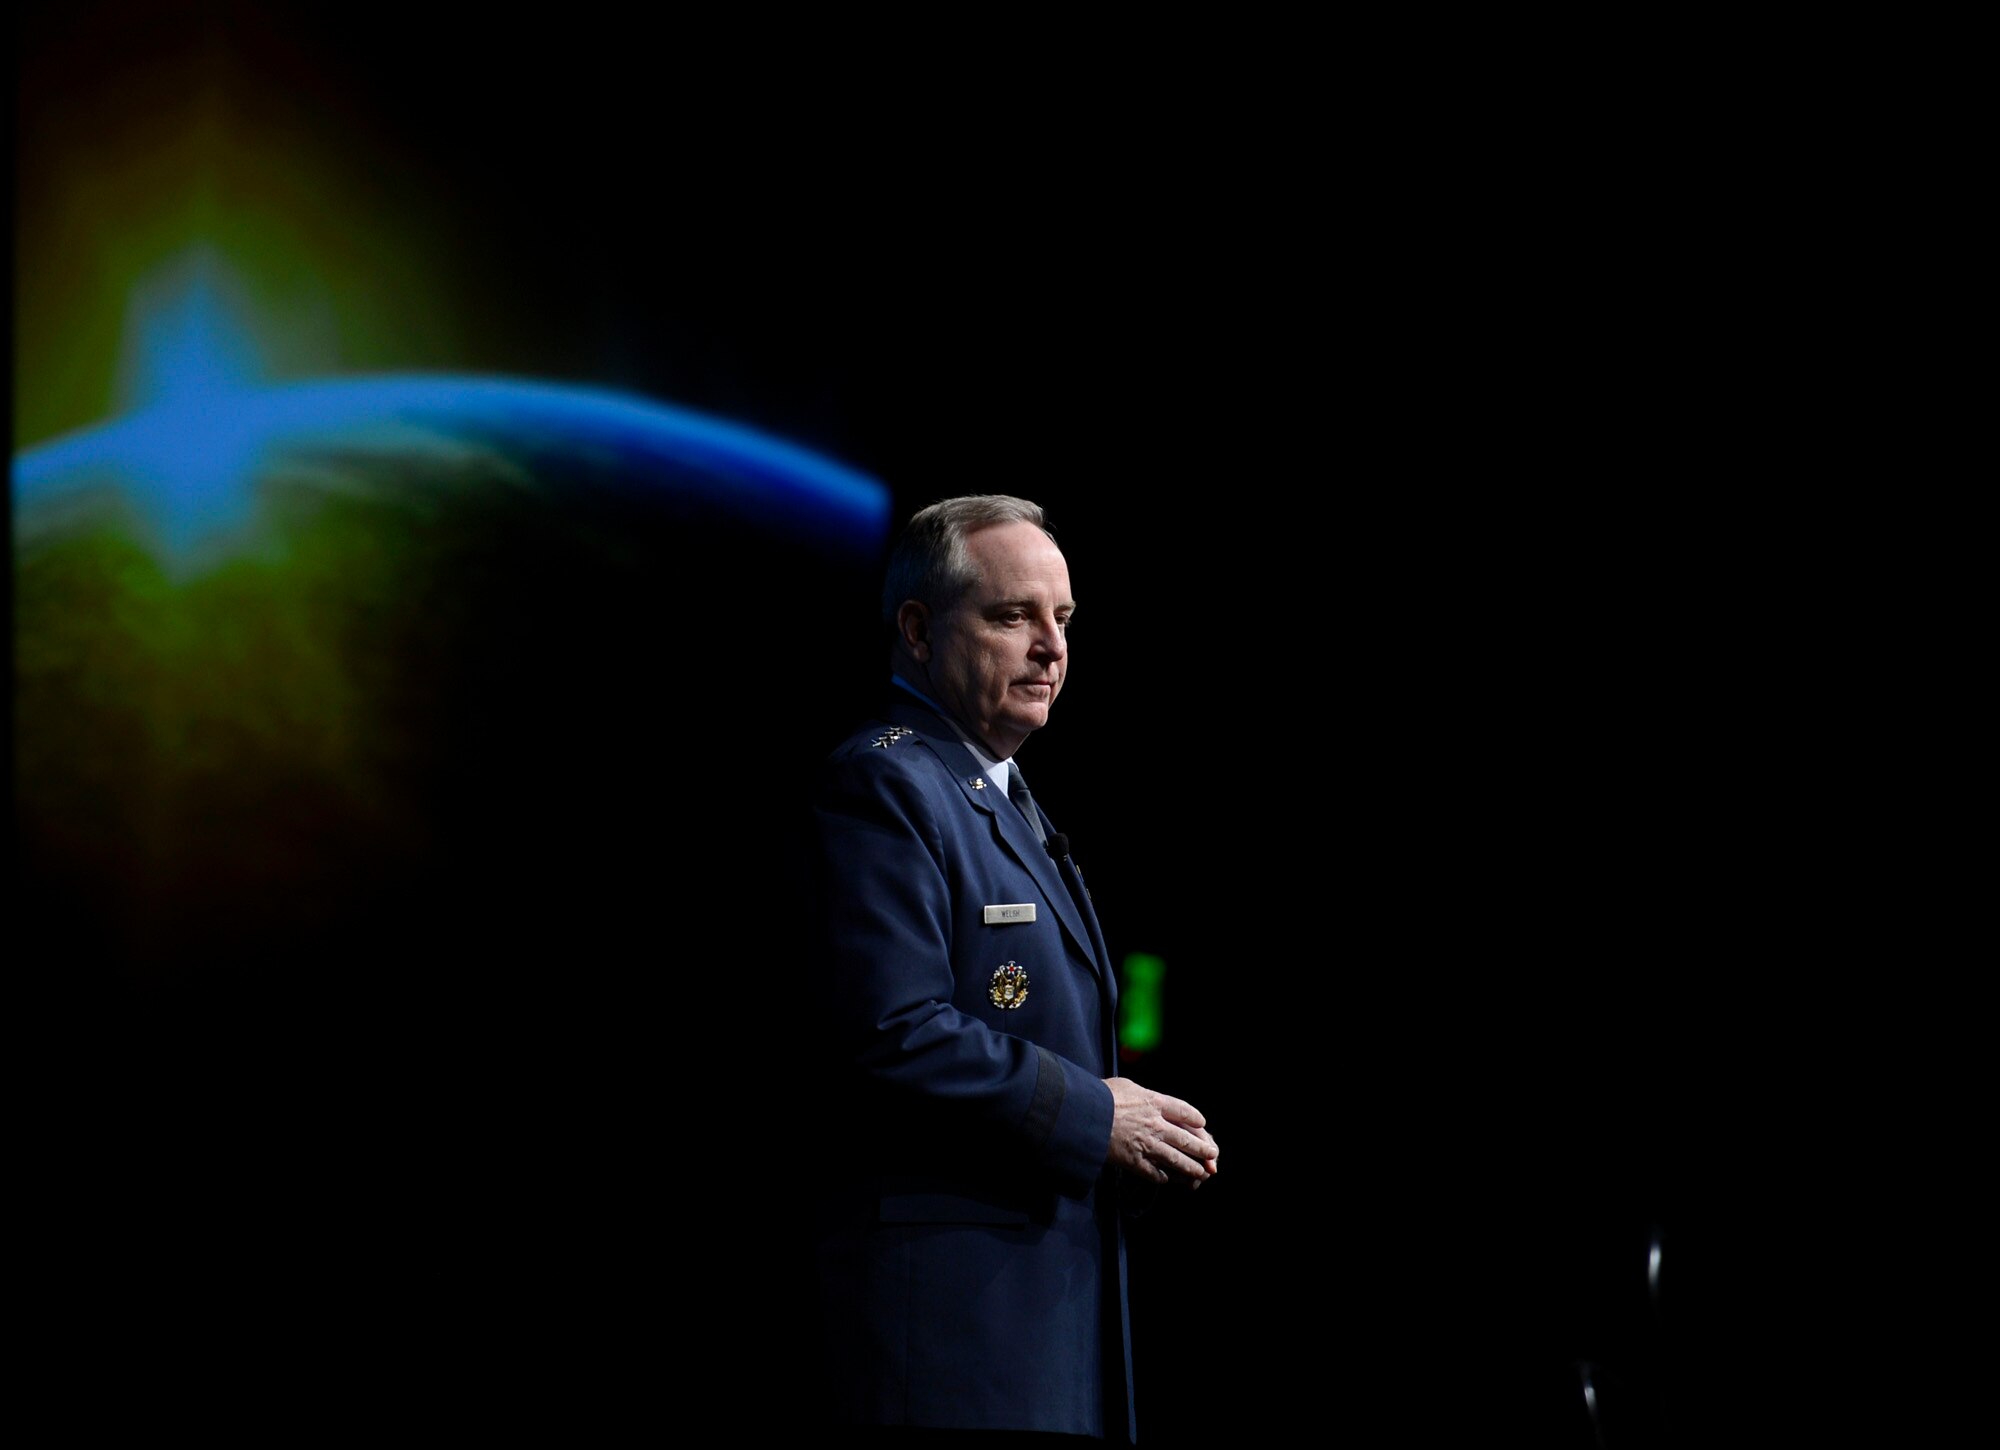 Air Force Chief of Staff Gen. Mark A. Welsh III delivers his 'Air Force Update' to attendees of the Air Force Association's annual Air Warfare Symposium and Technology Exposition Feb. 12, 2015, in Orlando, Fla. One of Welsh's points was that we need to continue on a path of innovation. (U.S. Air Force photo/Scott M. Ash)